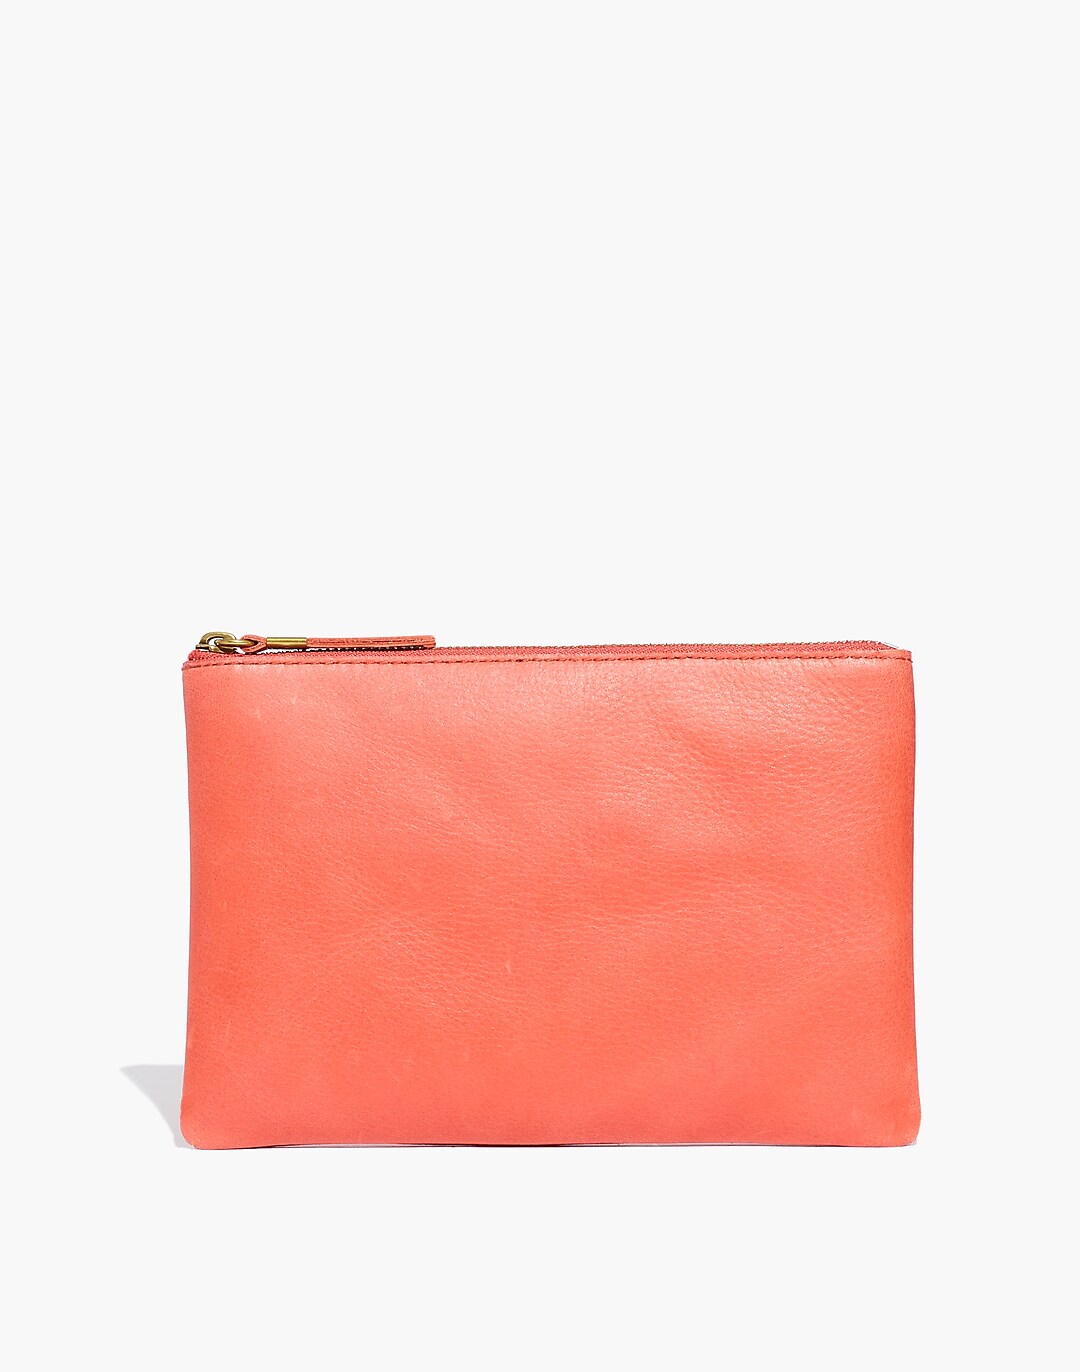 Small Leather Pouch - Giddy Up Clutch Purse